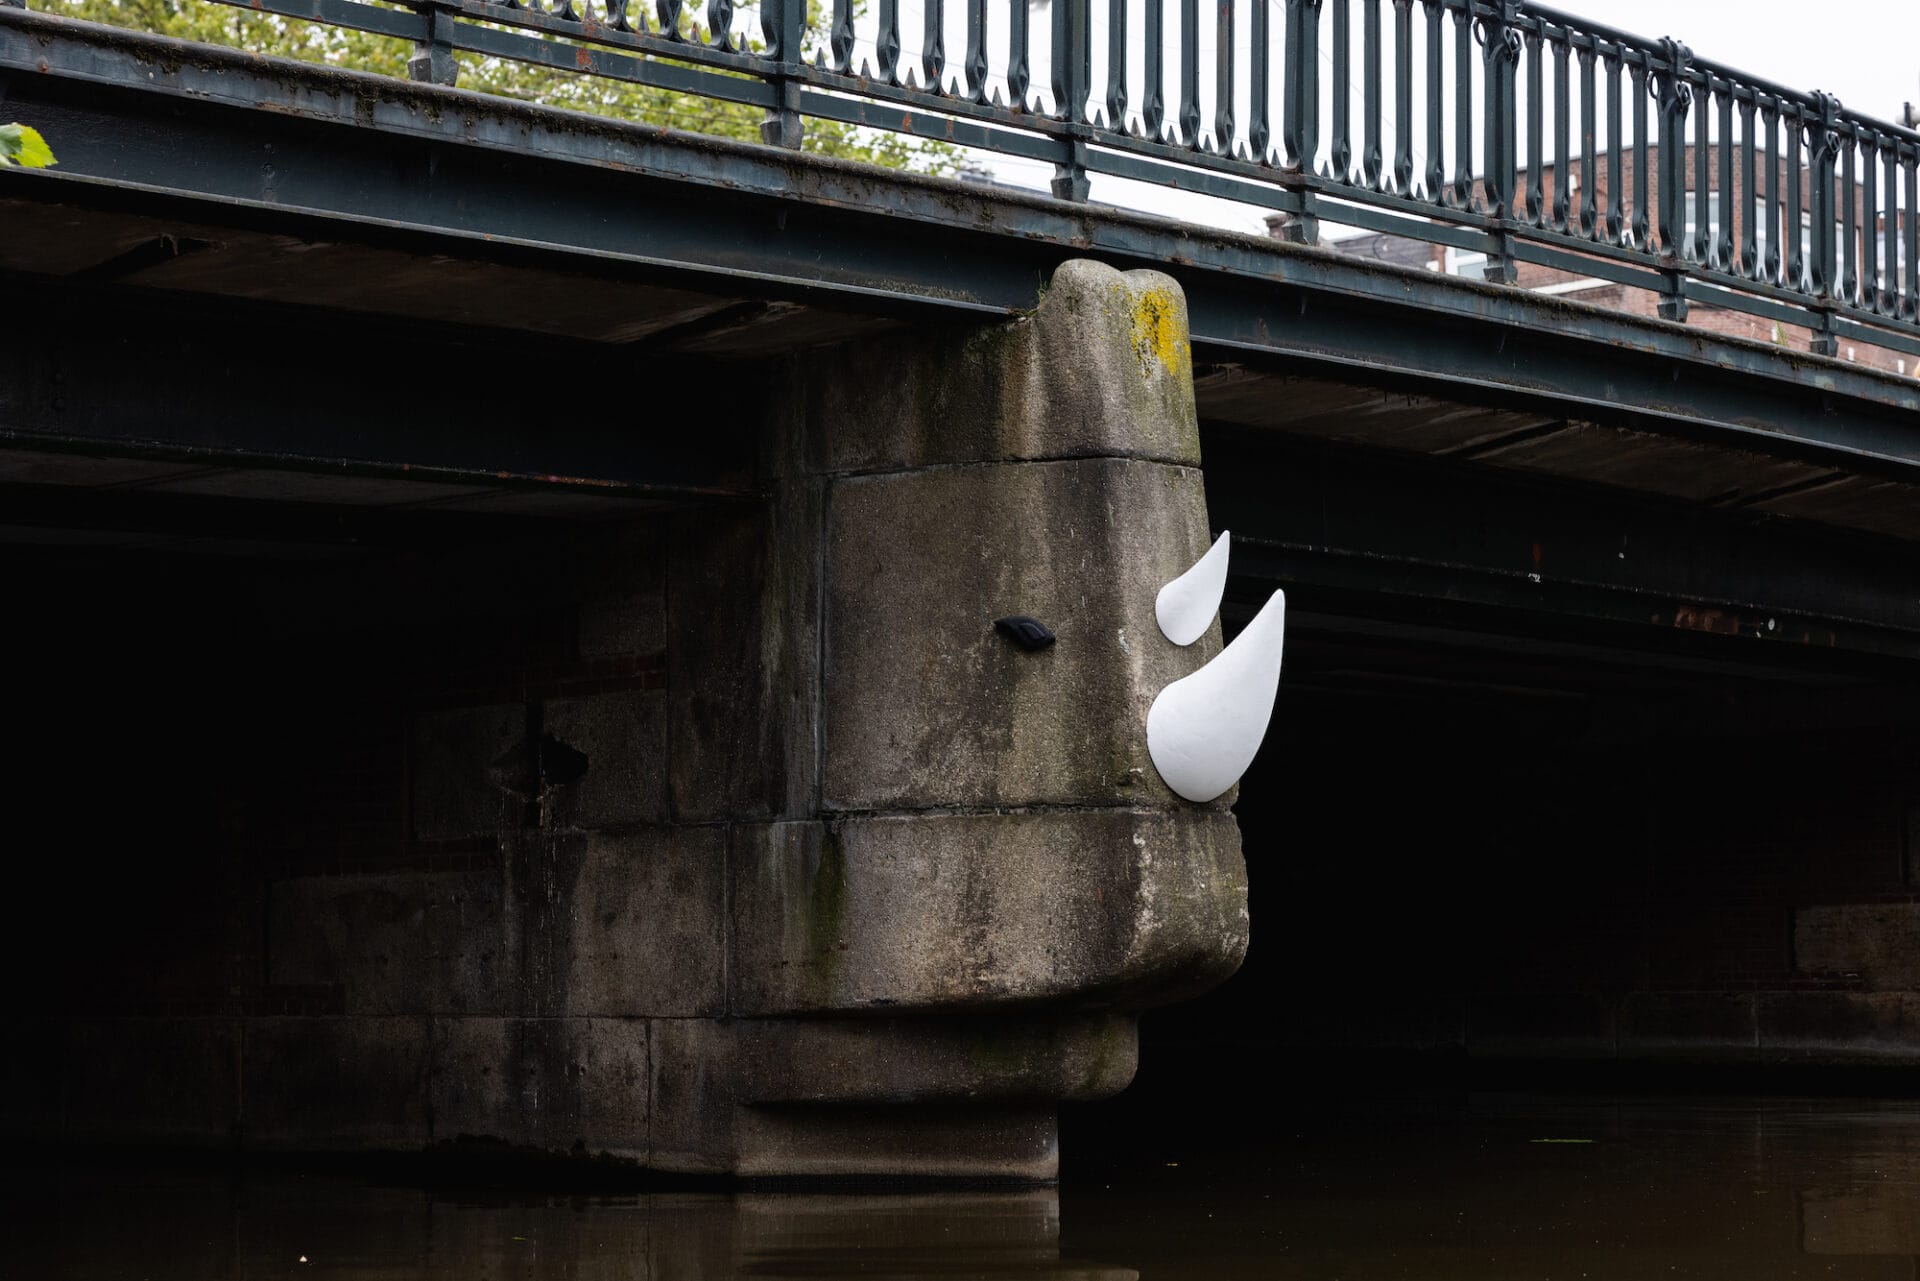 A street art intervention on a bridge column with eyes and two white horns to make it look like a rhino.